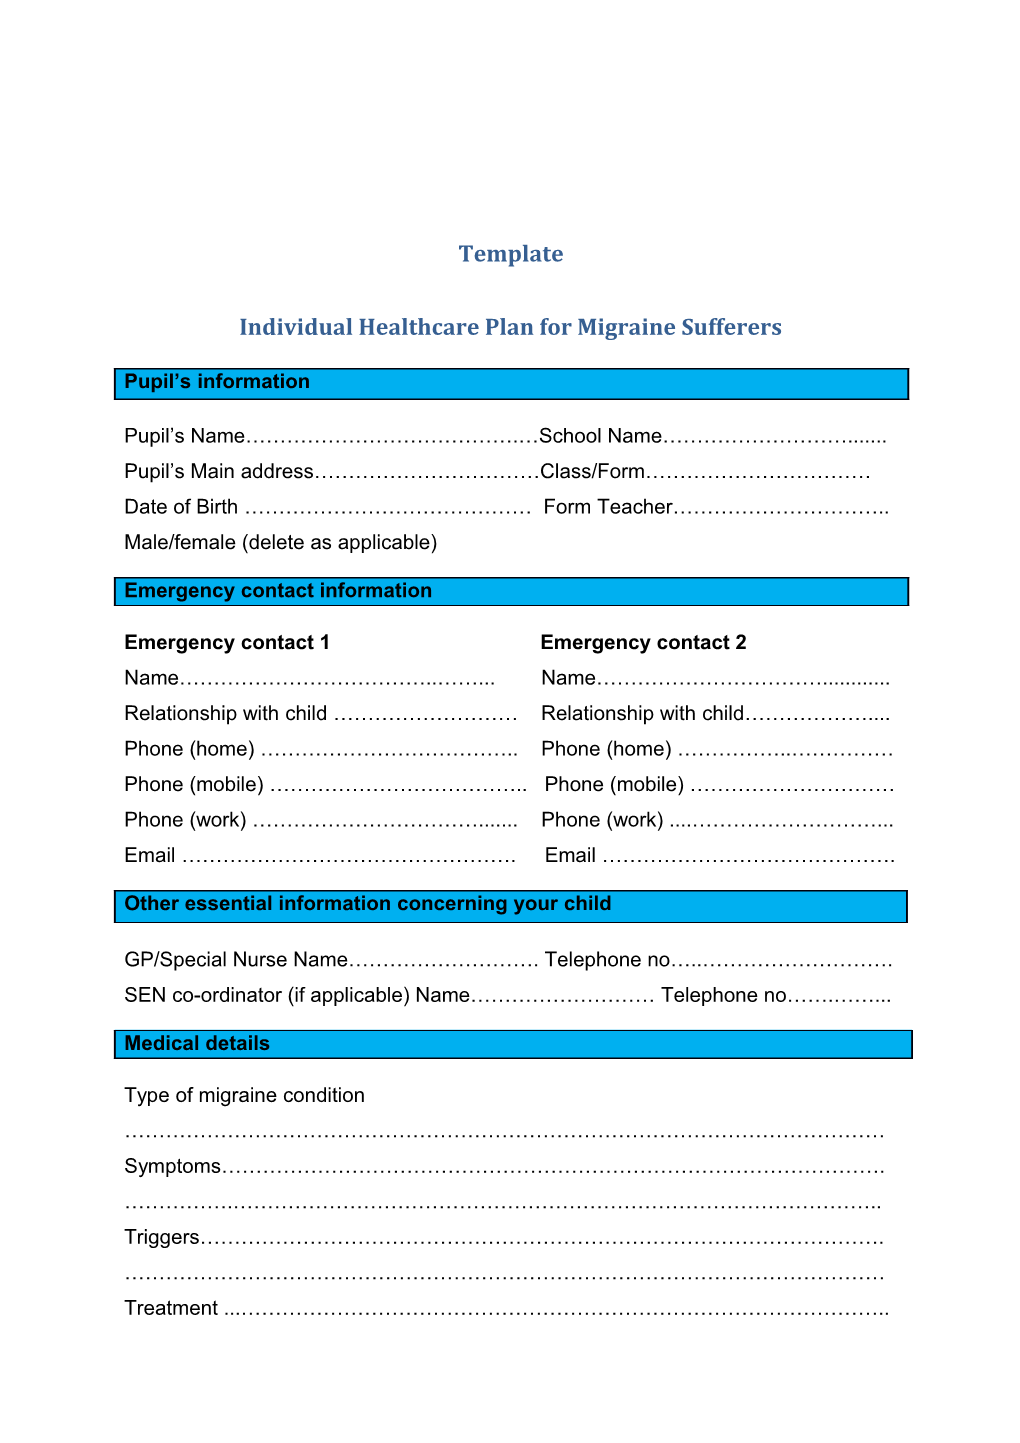 Individual Healthcare Plan for Migraine Sufferers